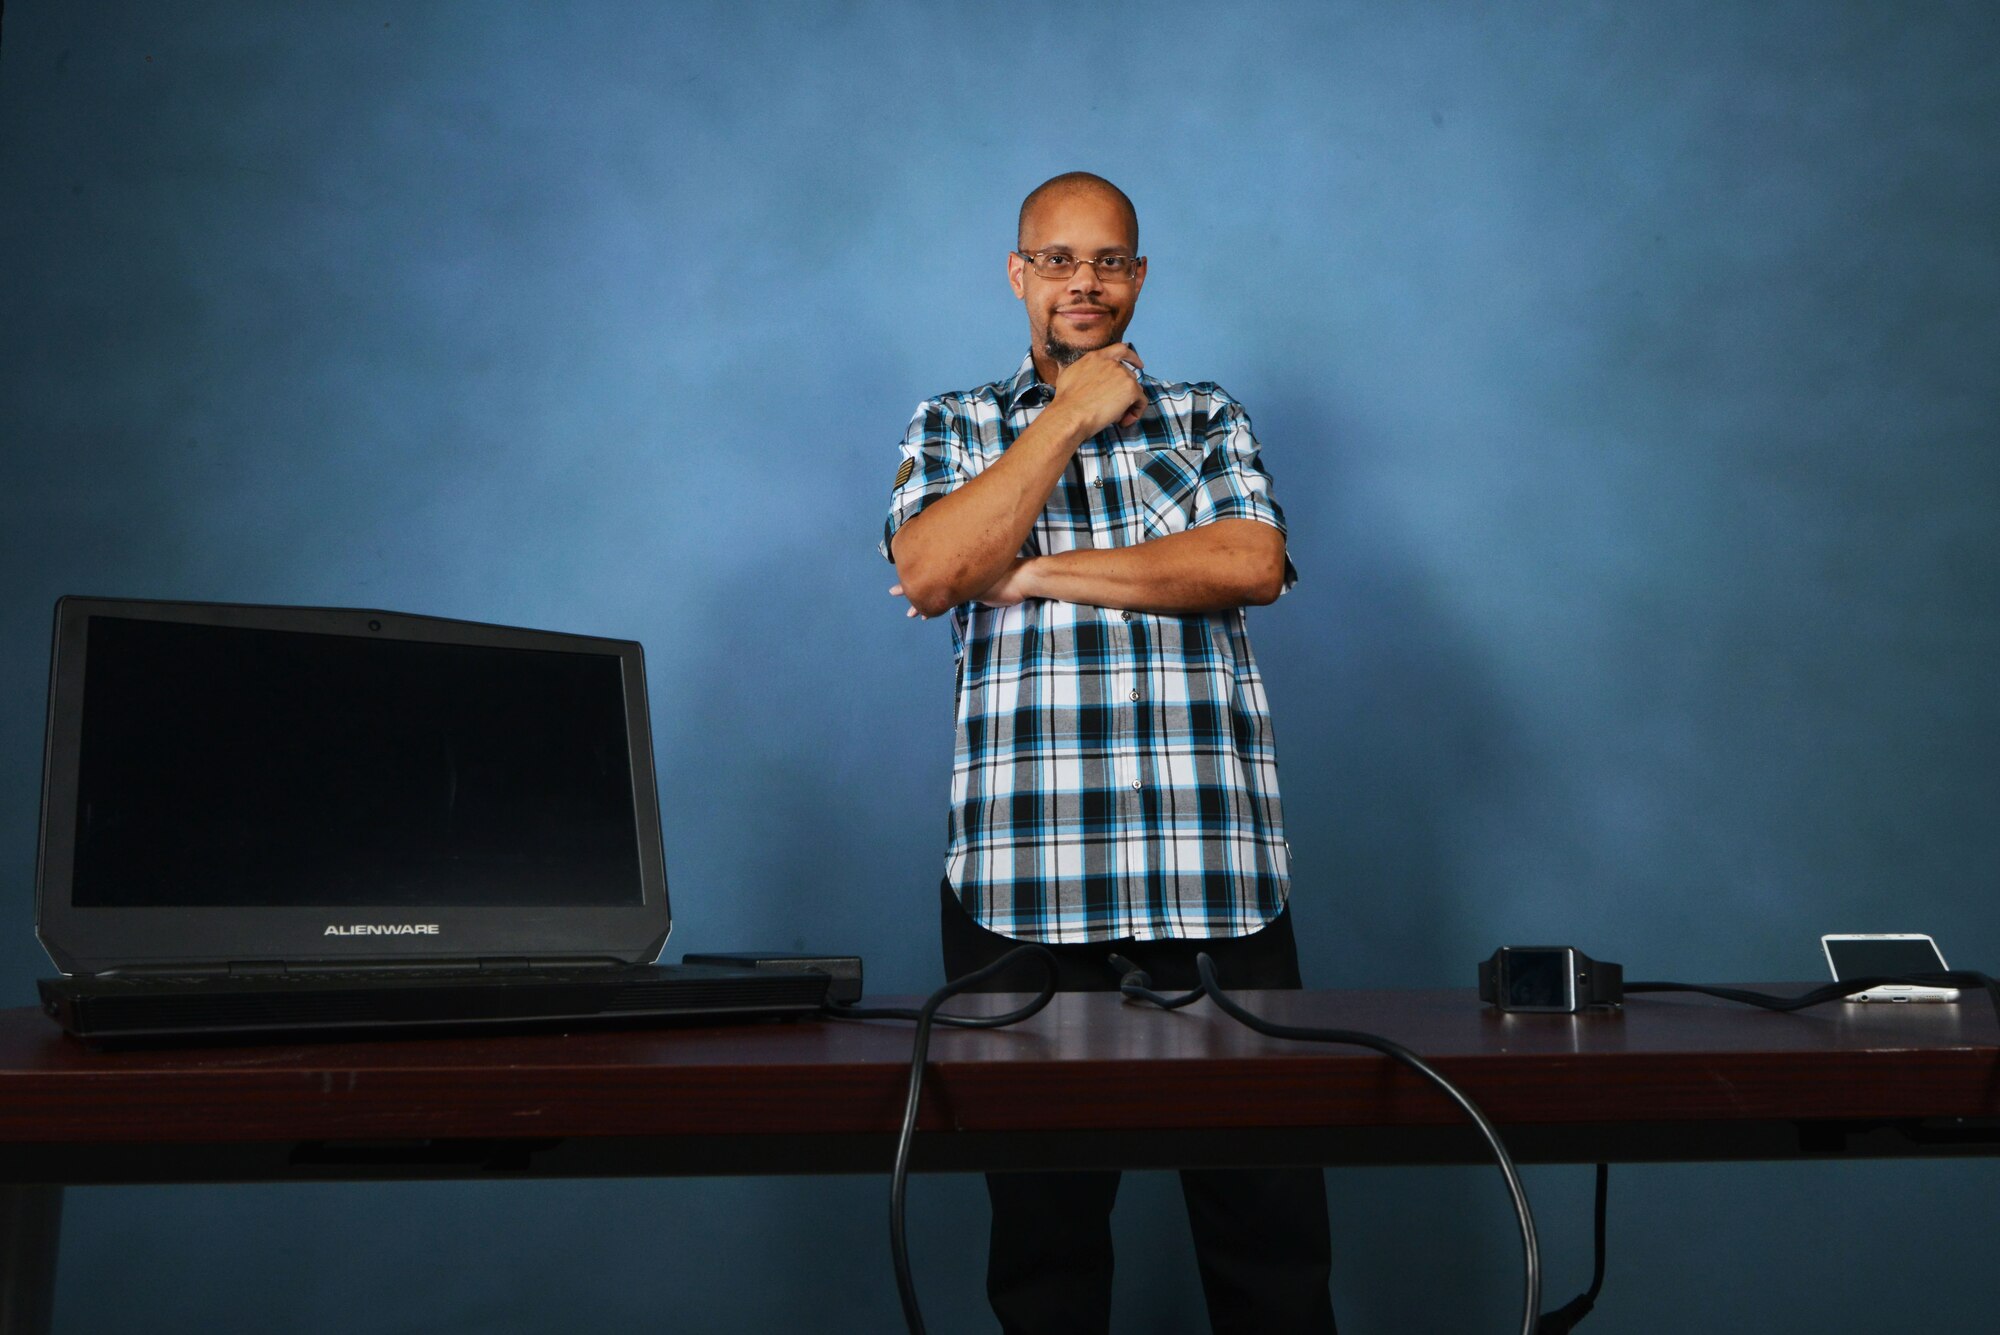 Juan Leon, 20th Force Support Squadron information technology data automation assistant, stands behind electronic devices at Shaw Air Force Base, S.C., May 16, 2017. Leon uses his class, Tech Talks with Juan, to share his love, excitement and knowledge of various kinds of technology with his fellow Team Shaw members. (U.S. Air Force photo by Airman 1st Class Destinee Sweeney)